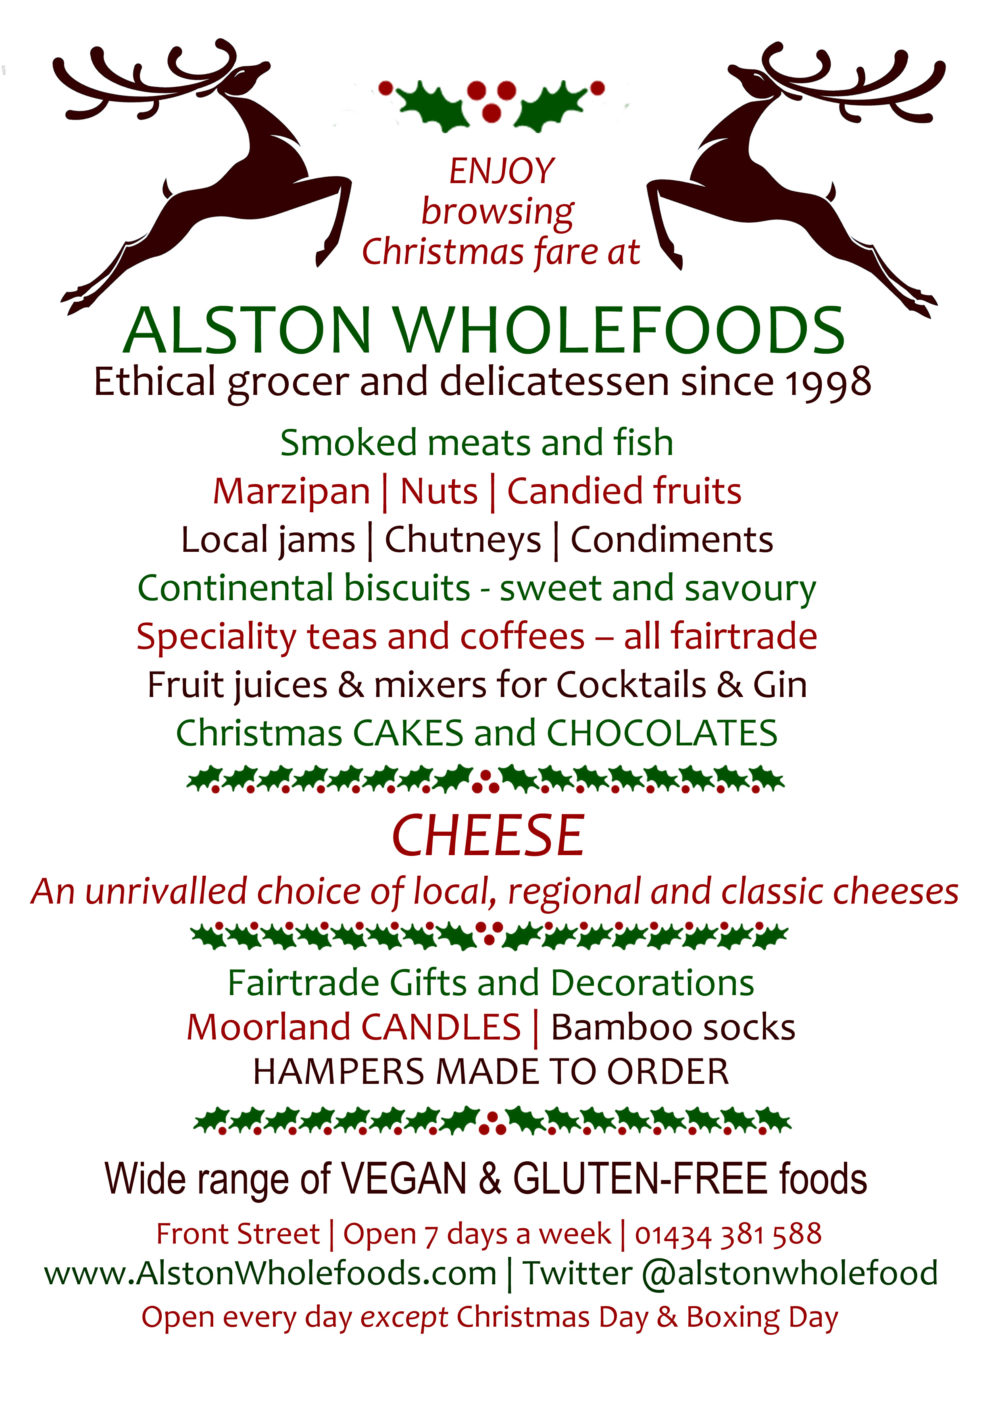 Browse Christmas fare at Alston Wholefoods